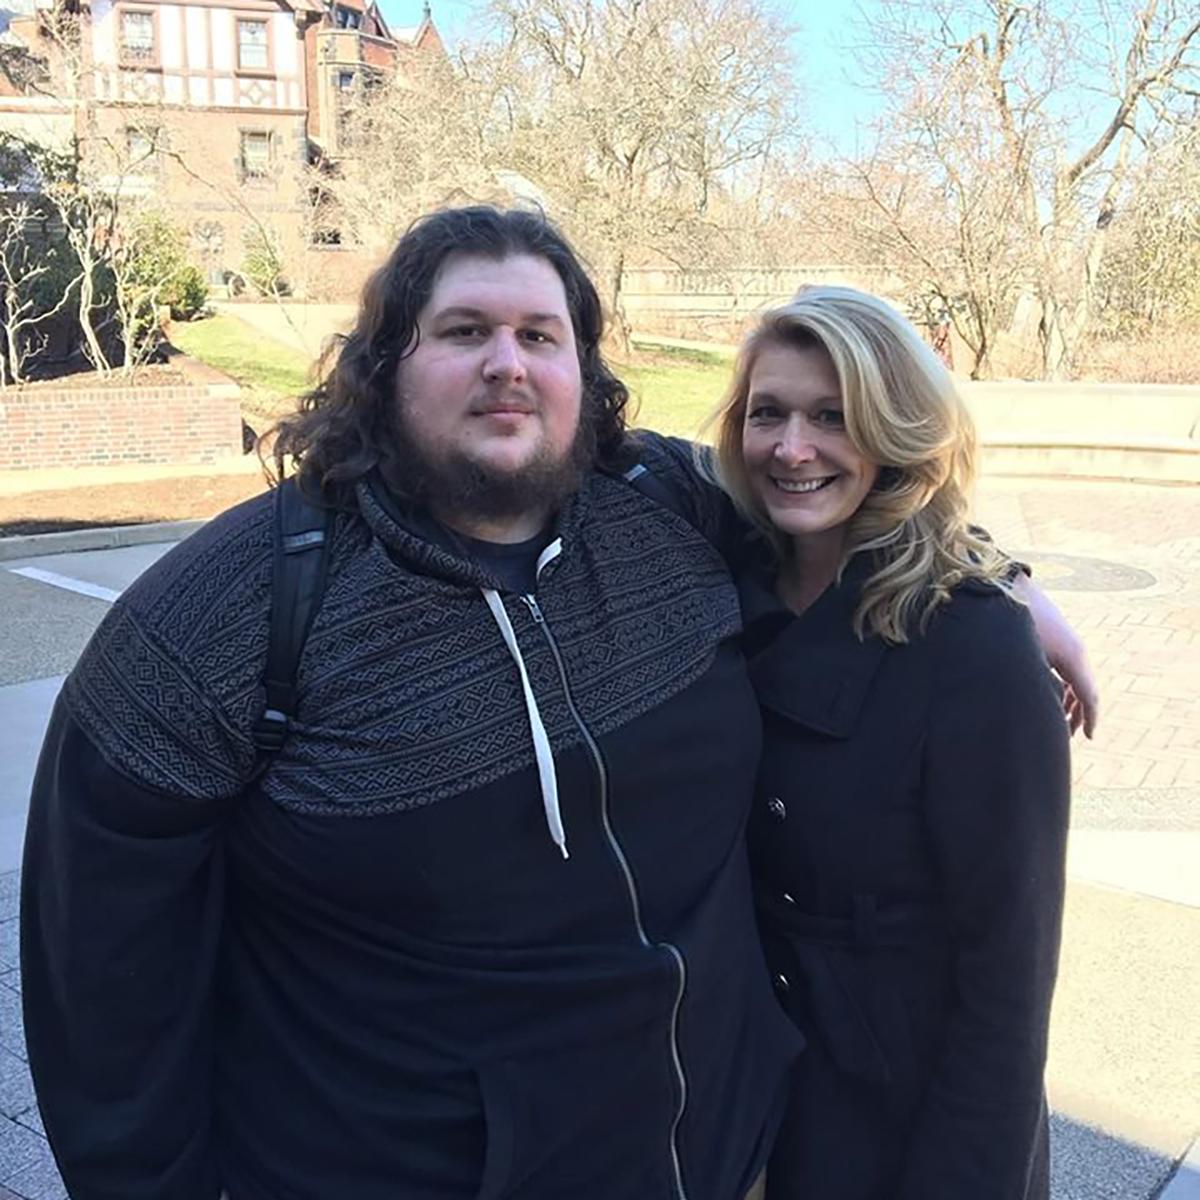 Photo of Christopher posing with a woman on Shadyside Campus